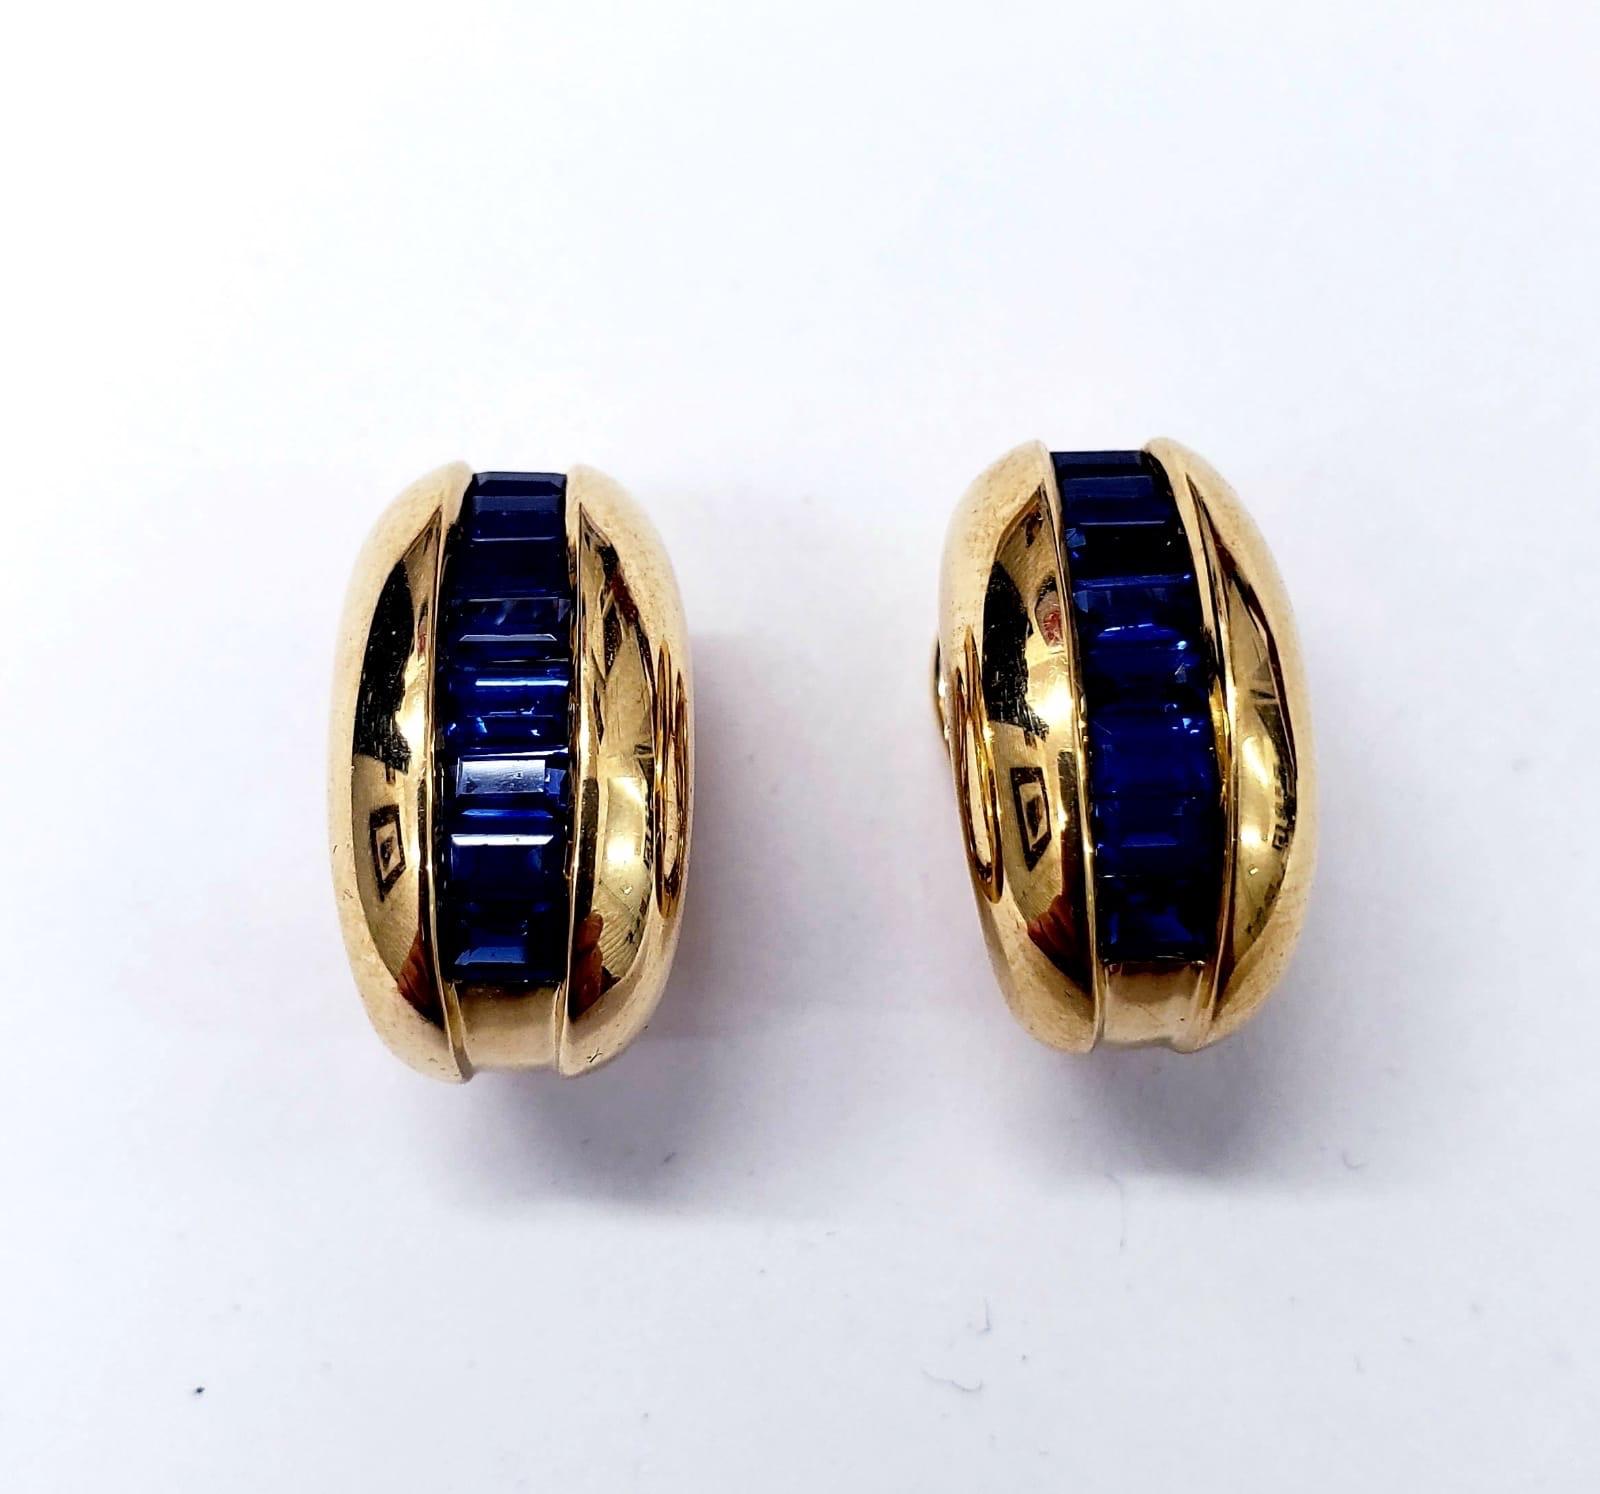 Cartier Yellow Gold Bombe Bean 1.50ct Blue Sapphire Earrings. The total carats weights approx 1.50ct. The earrings are made of 18k solid yellow gold. The earrings weight 12.8 grams. Features post and hinge clip fittings. Measures 10.3mm X 18mm.